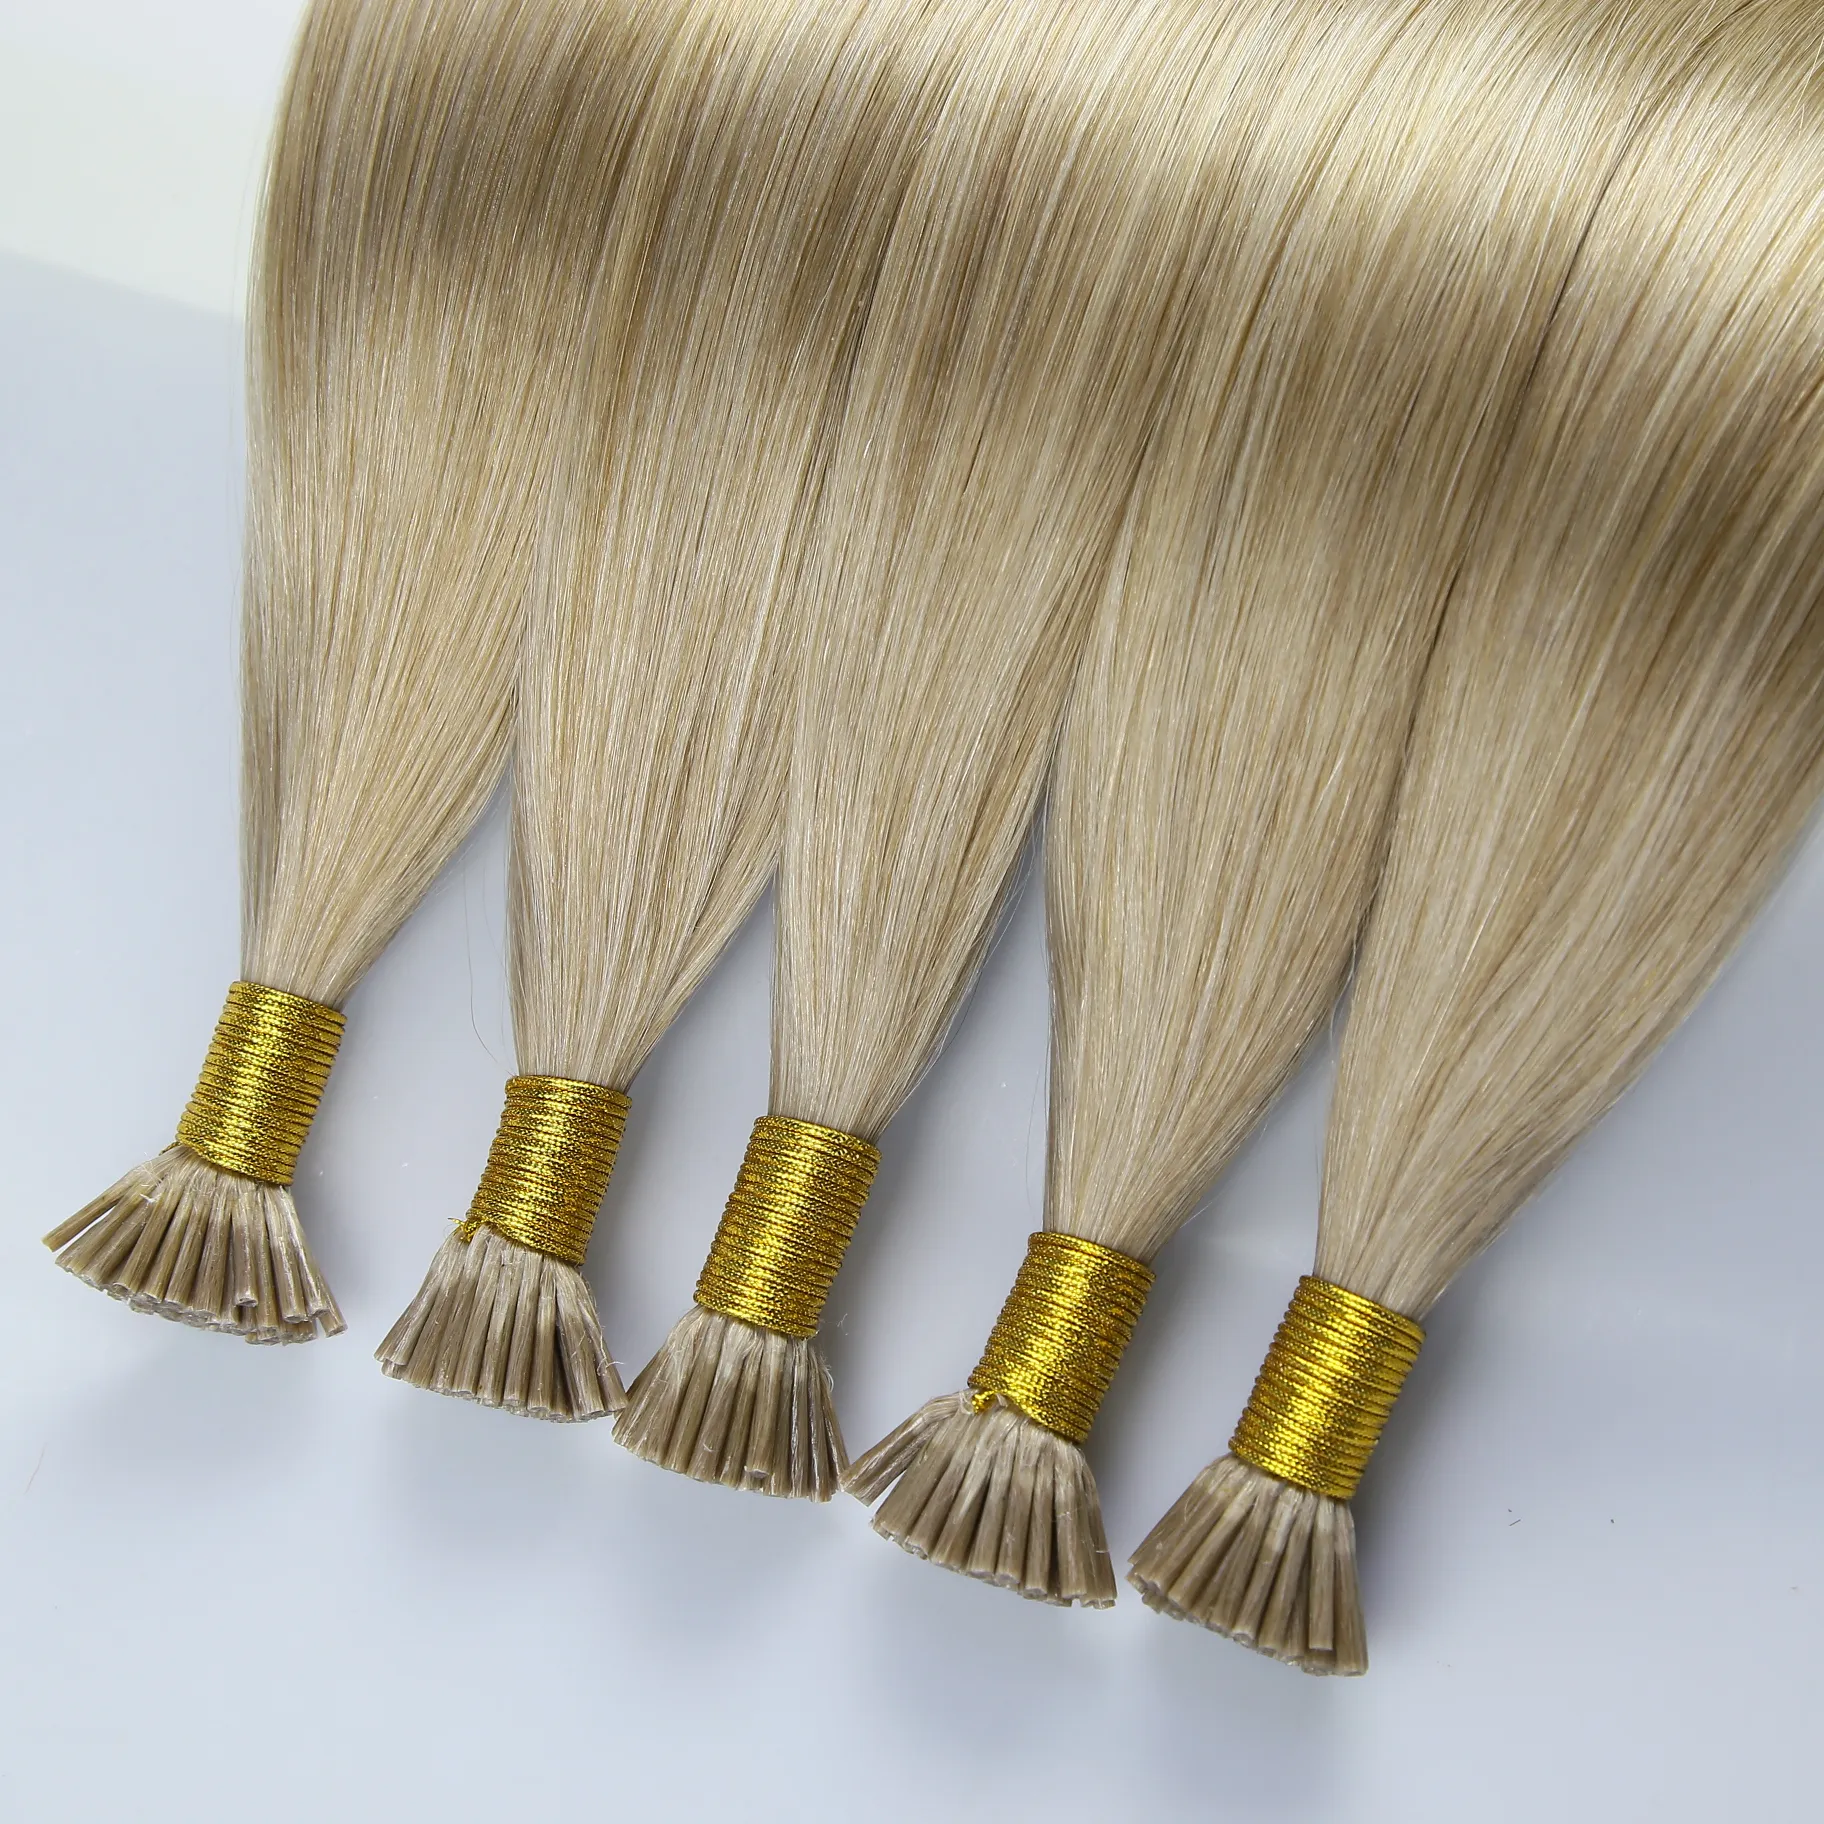 Wholesale Hot Sale Russian Pre Bonded Human Hair 0.8gram Double Drawn Remy U Tip Flat Tip Hair I Tip Hair Extensions